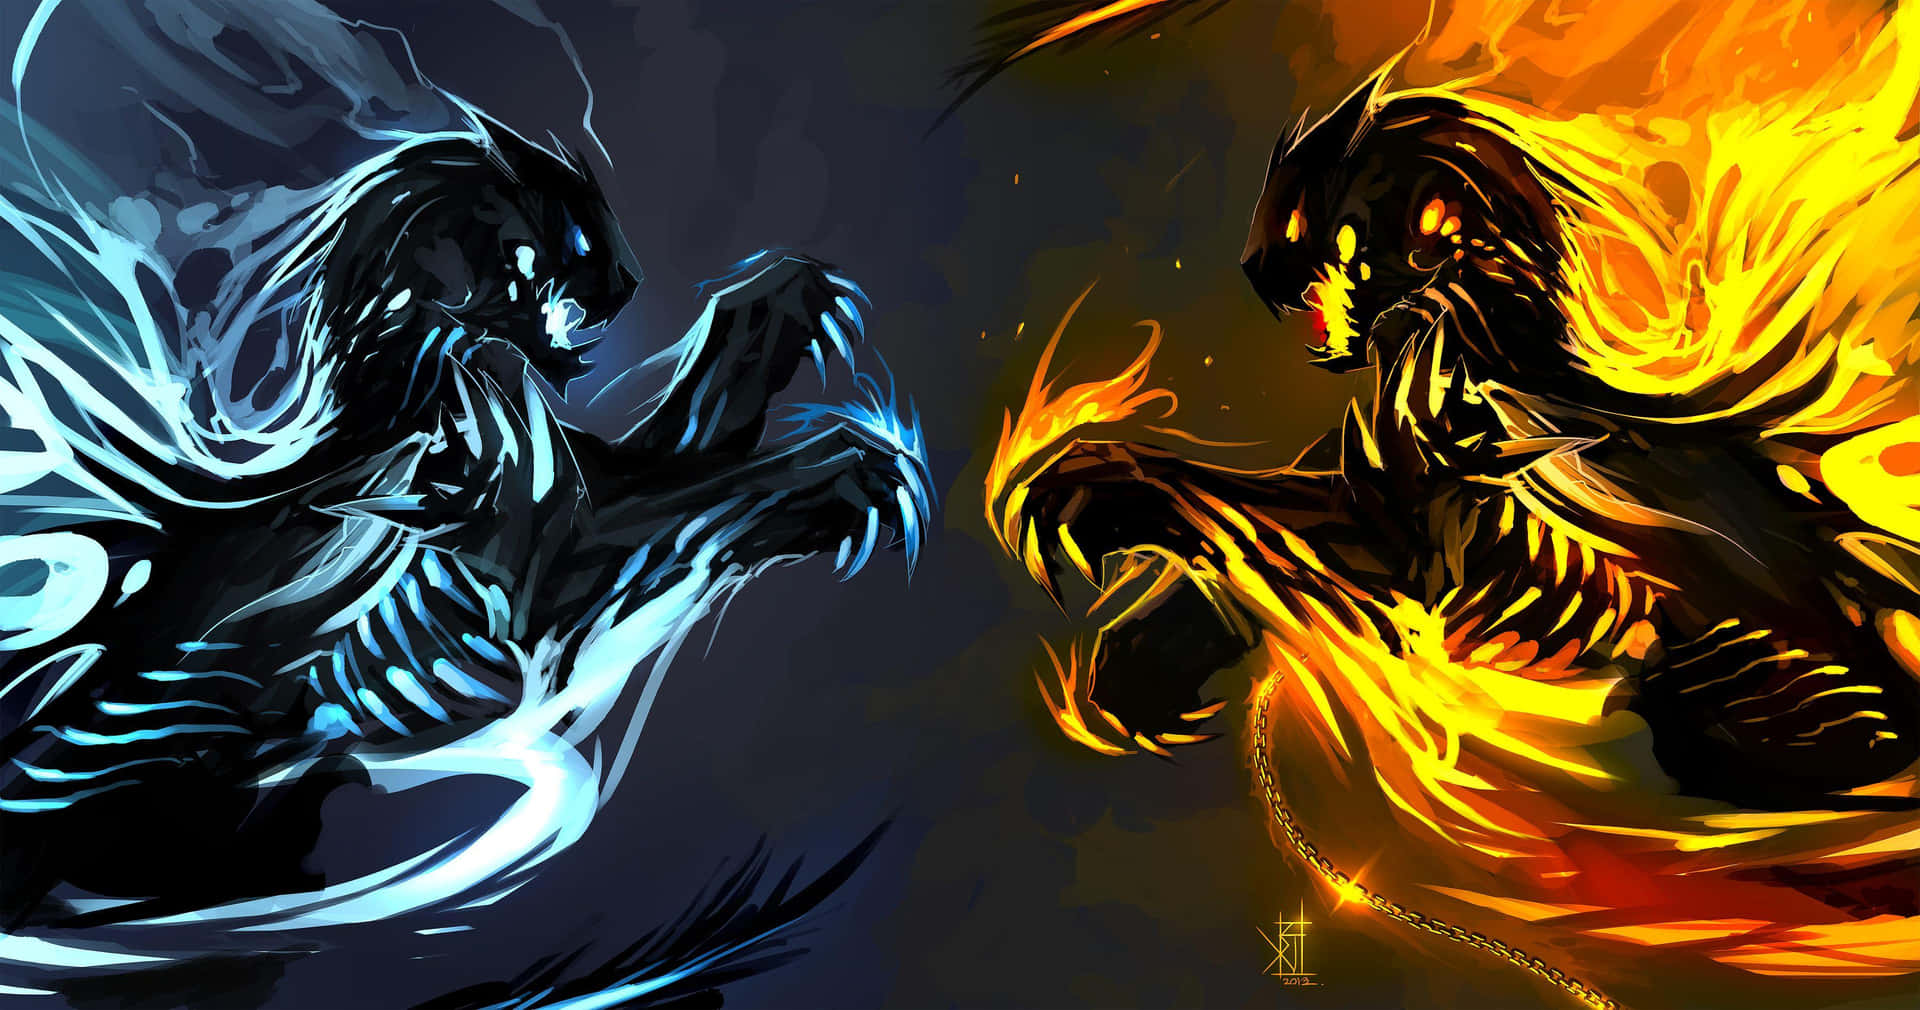 "The Powerful Symbiosis of Water and Fire" Wallpaper